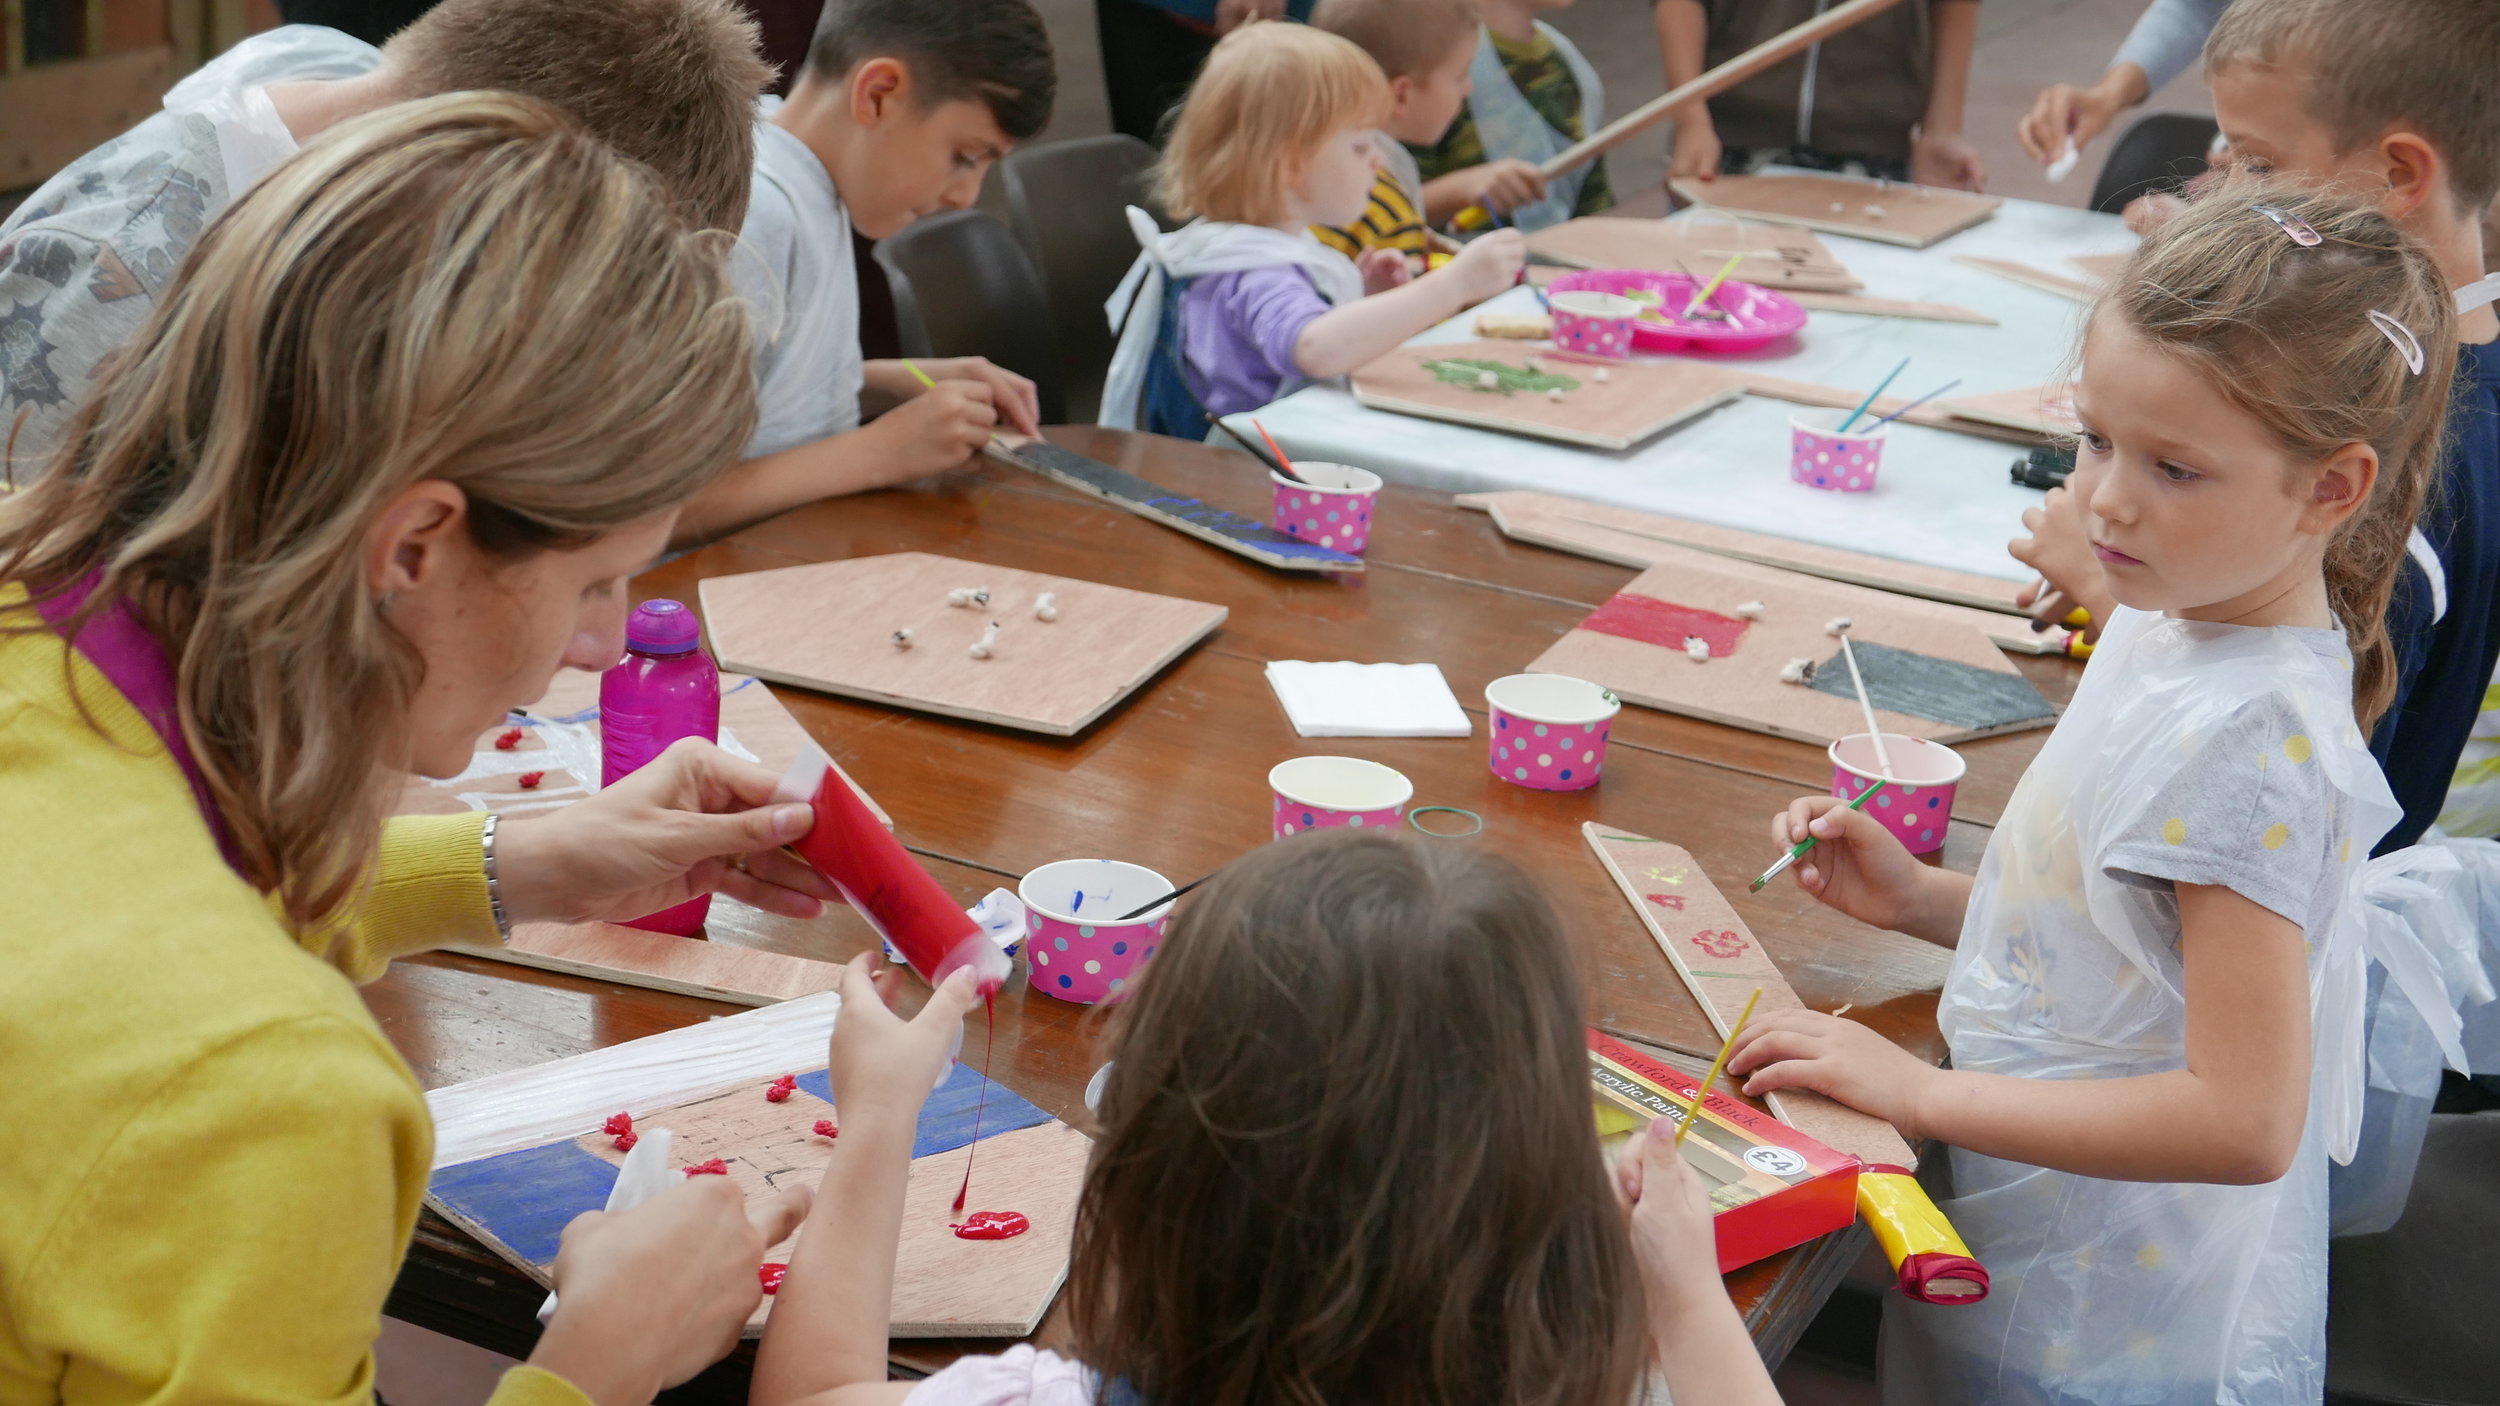 A kids workshop in the Upper Gallery